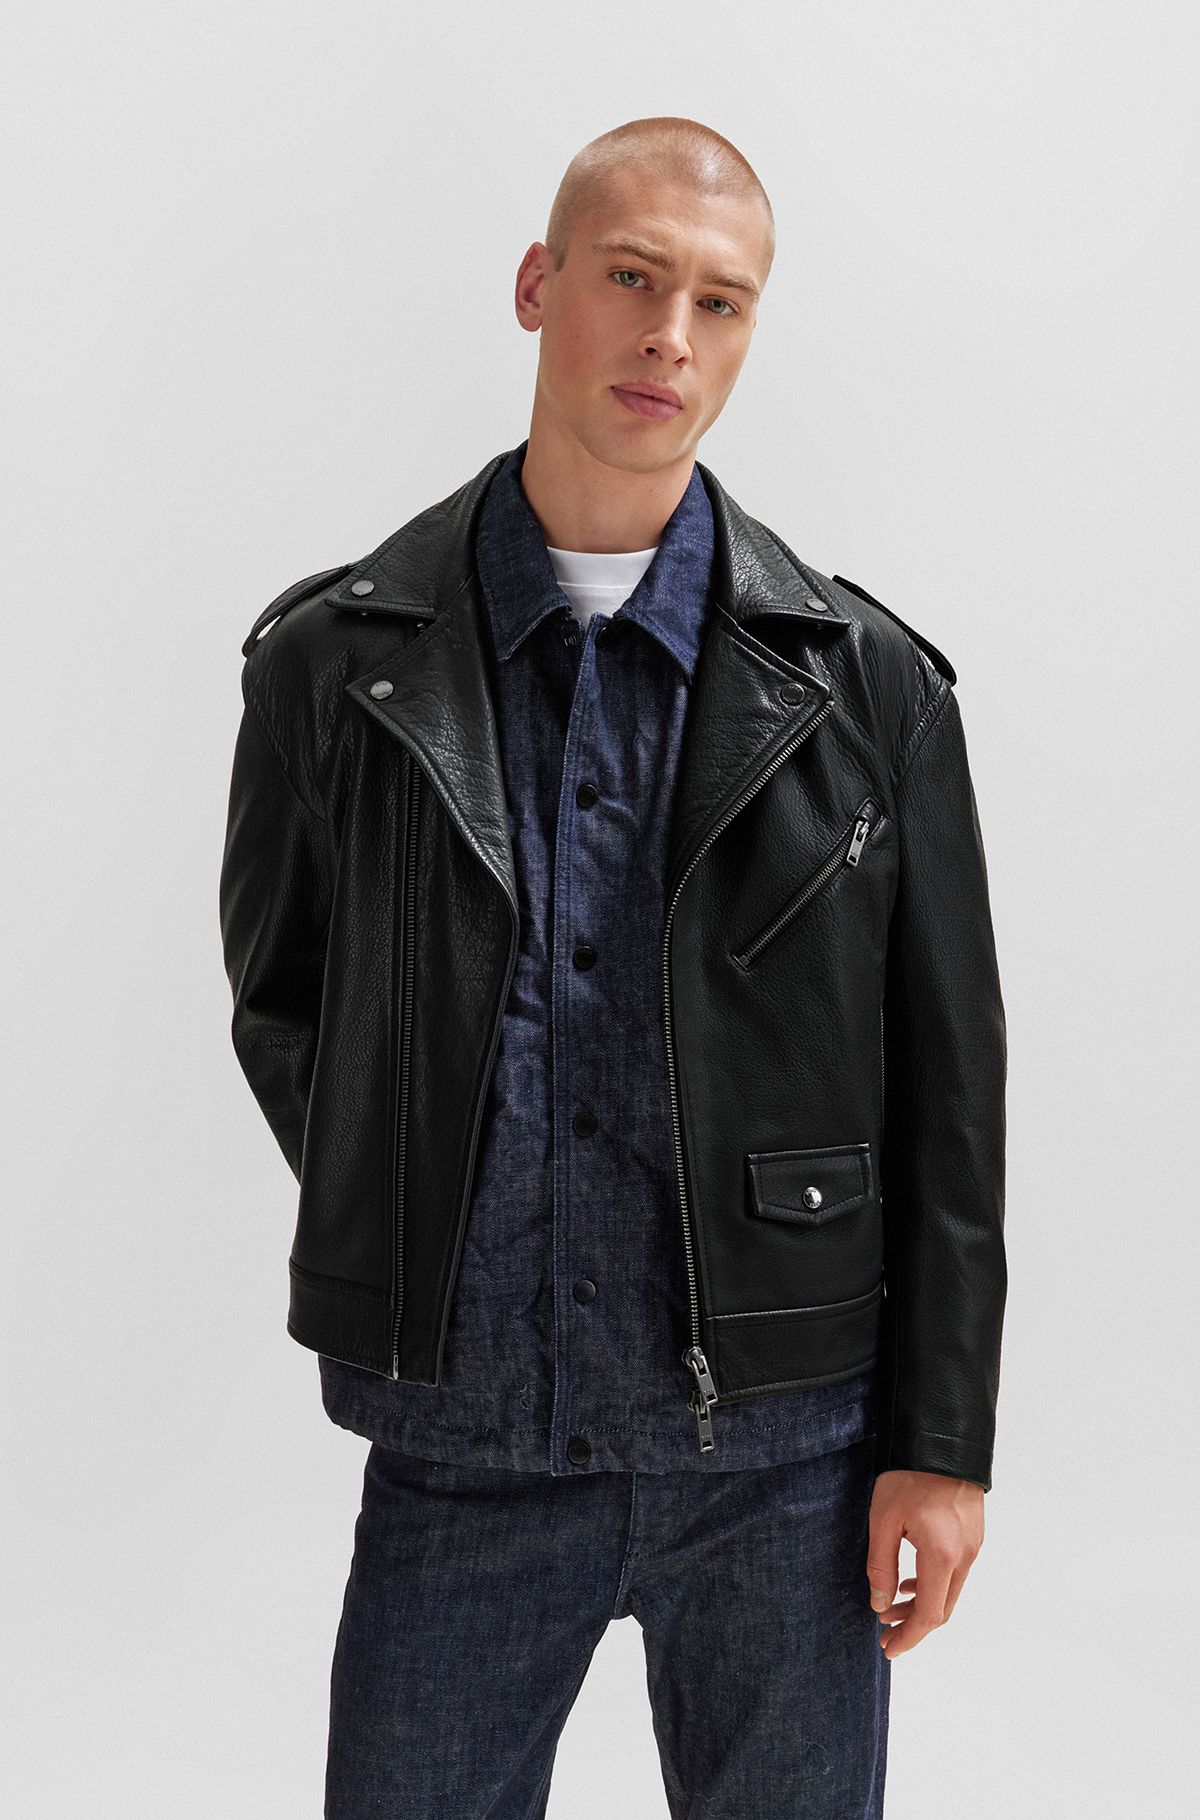 Regular-fit jacket in buffalo leather with branded snaps, Black